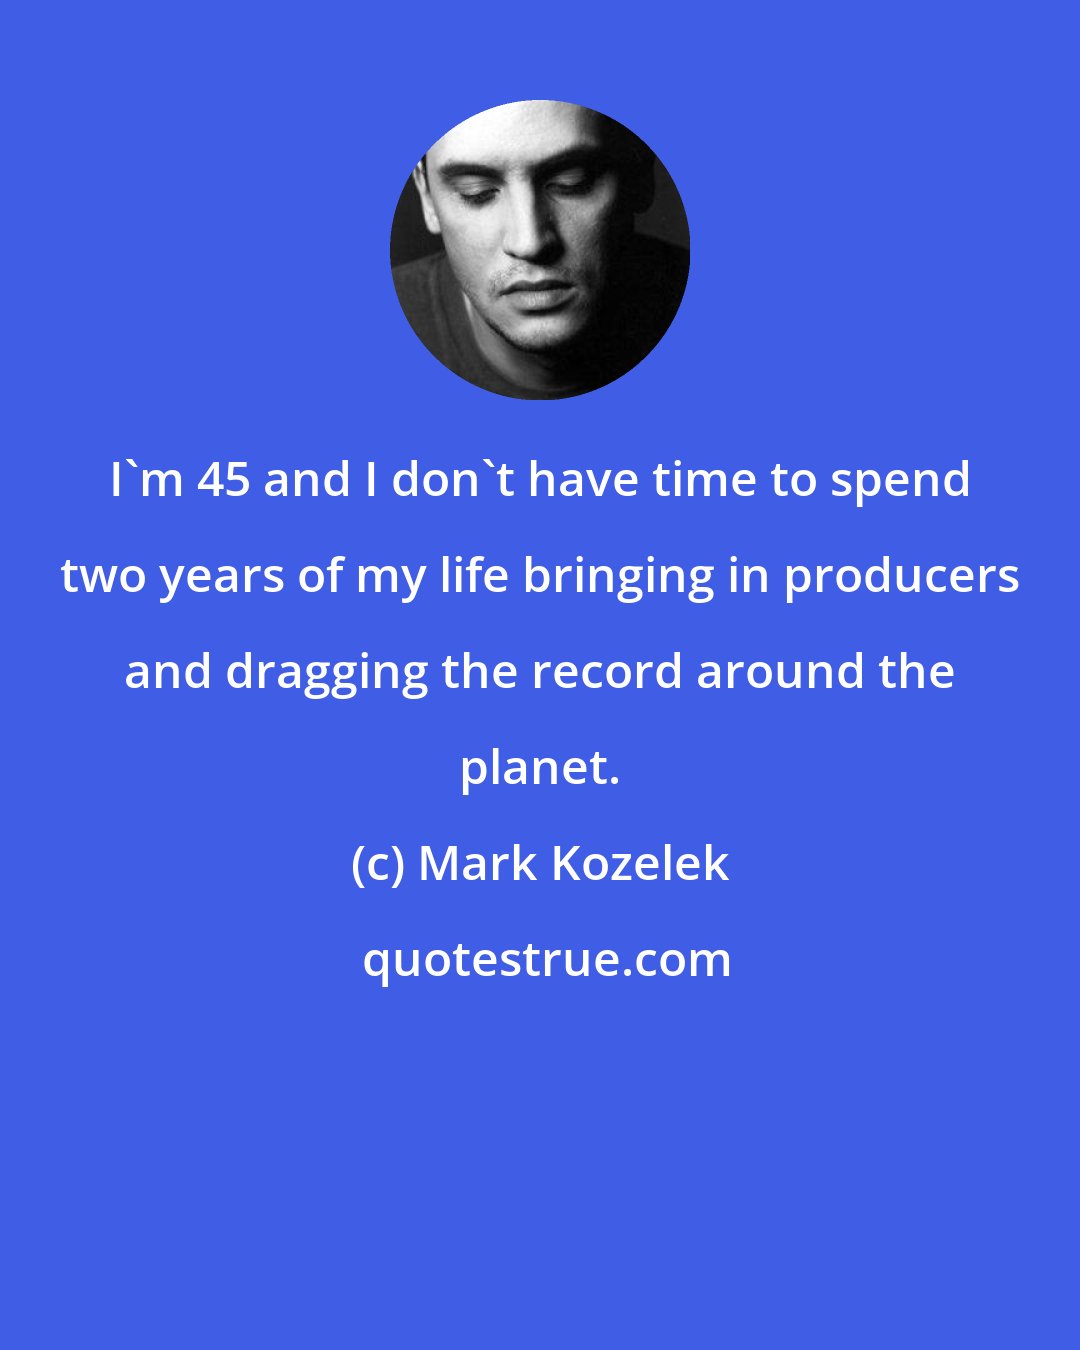 Mark Kozelek: I'm 45 and I don't have time to spend two years of my life bringing in producers and dragging the record around the planet.